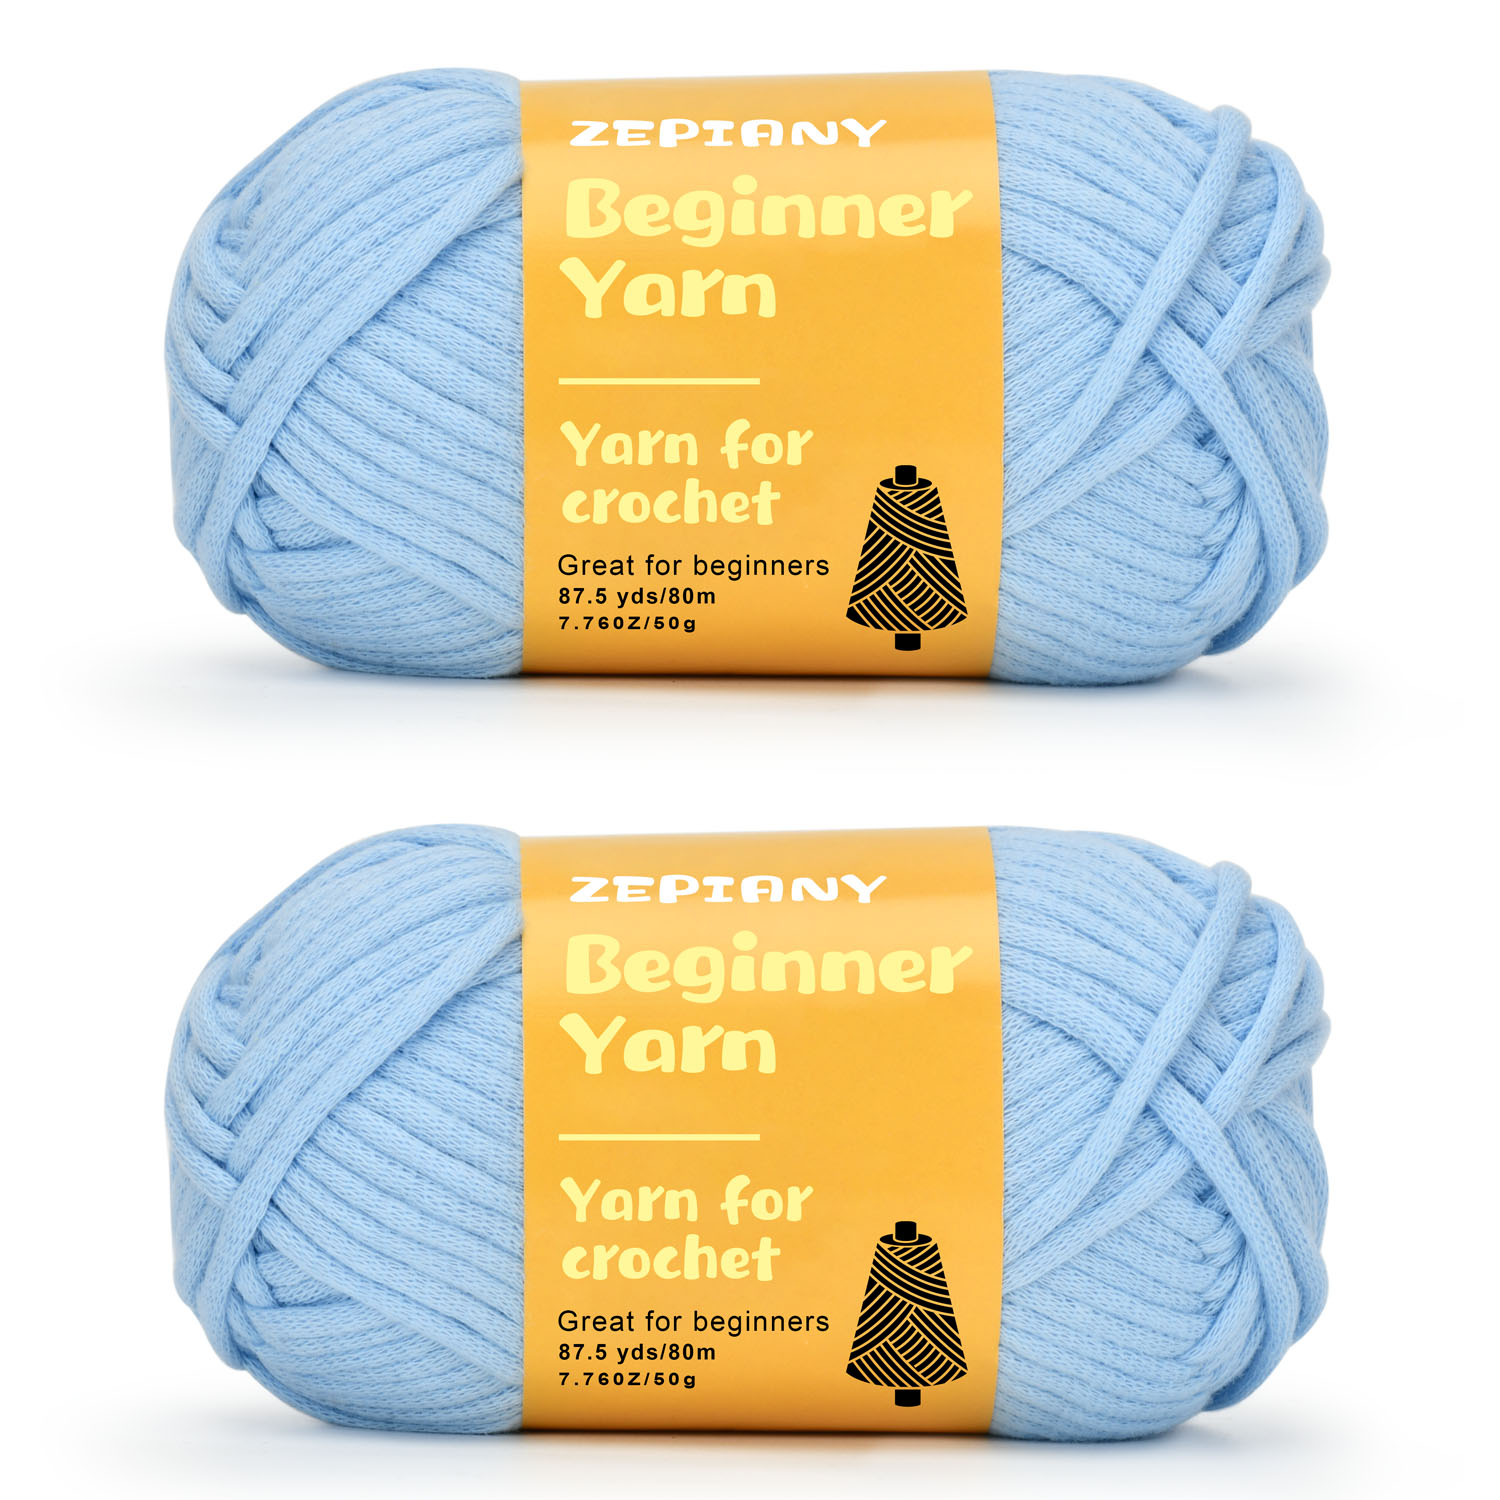 300g Easy Yarn for Crocheting, Chunky Thick Cotton Yarn Cotton-Nylon Blend  Yarn Easy to See Stitches with Crocehting Accessories for Crocheting